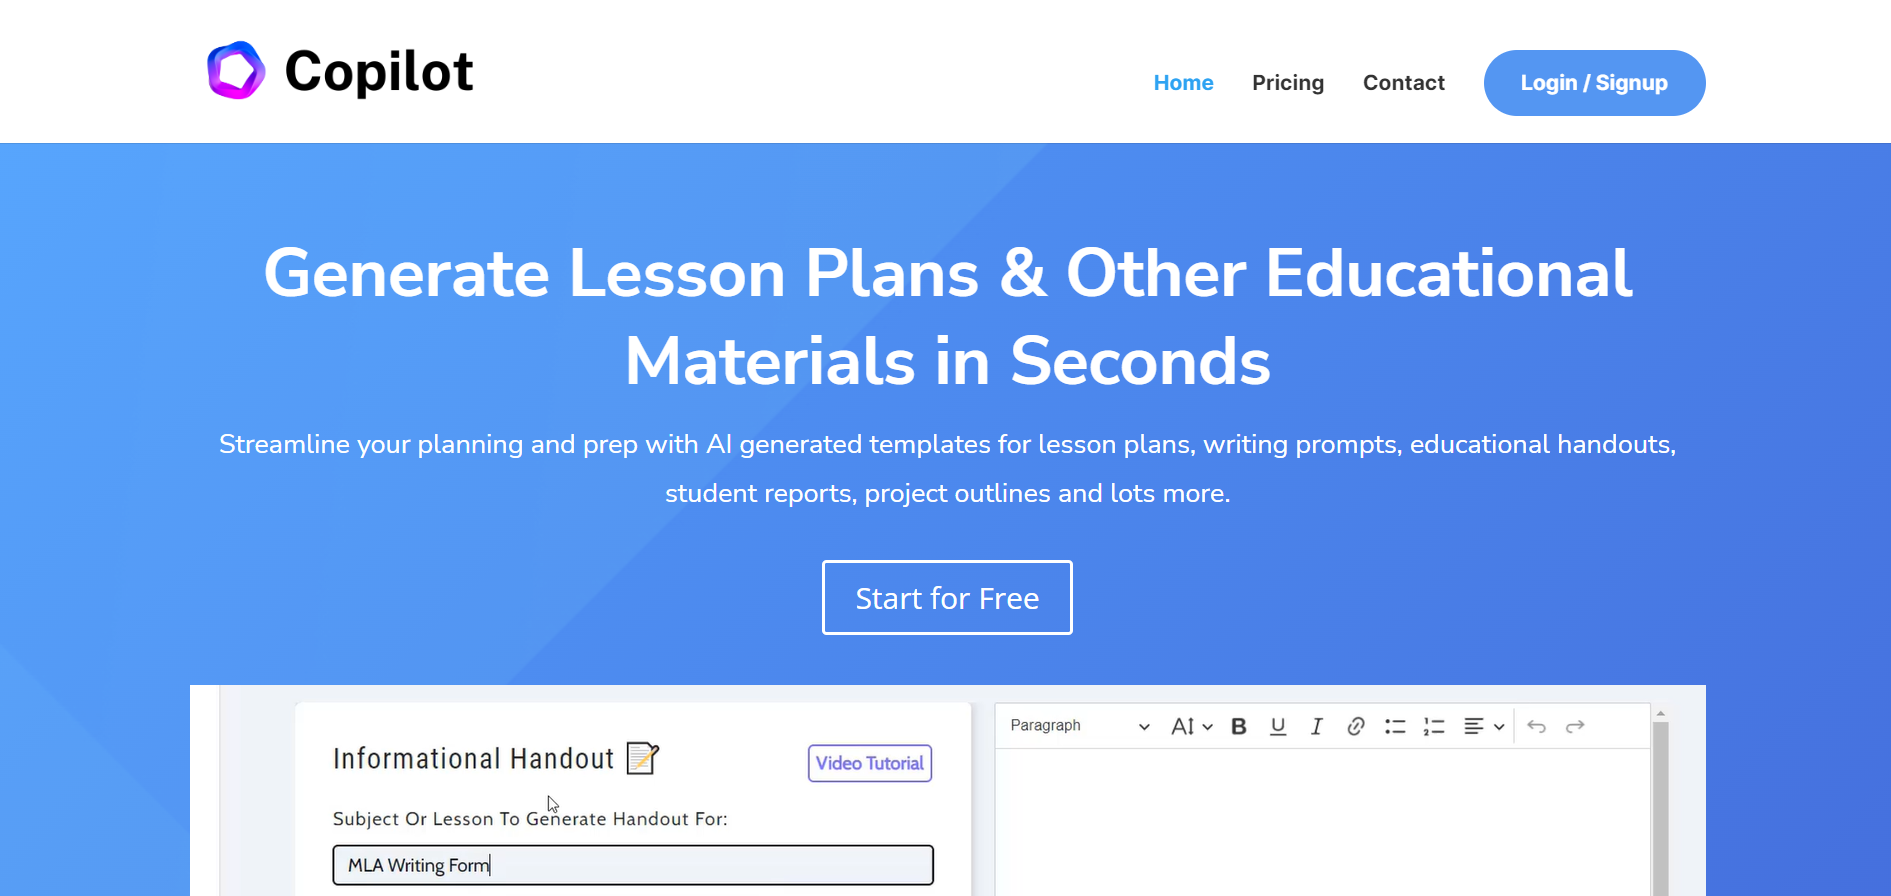 Maximize Your Time and Effectiveness with Educationcopilot.com: The Ultimate Teacher’s Companion!